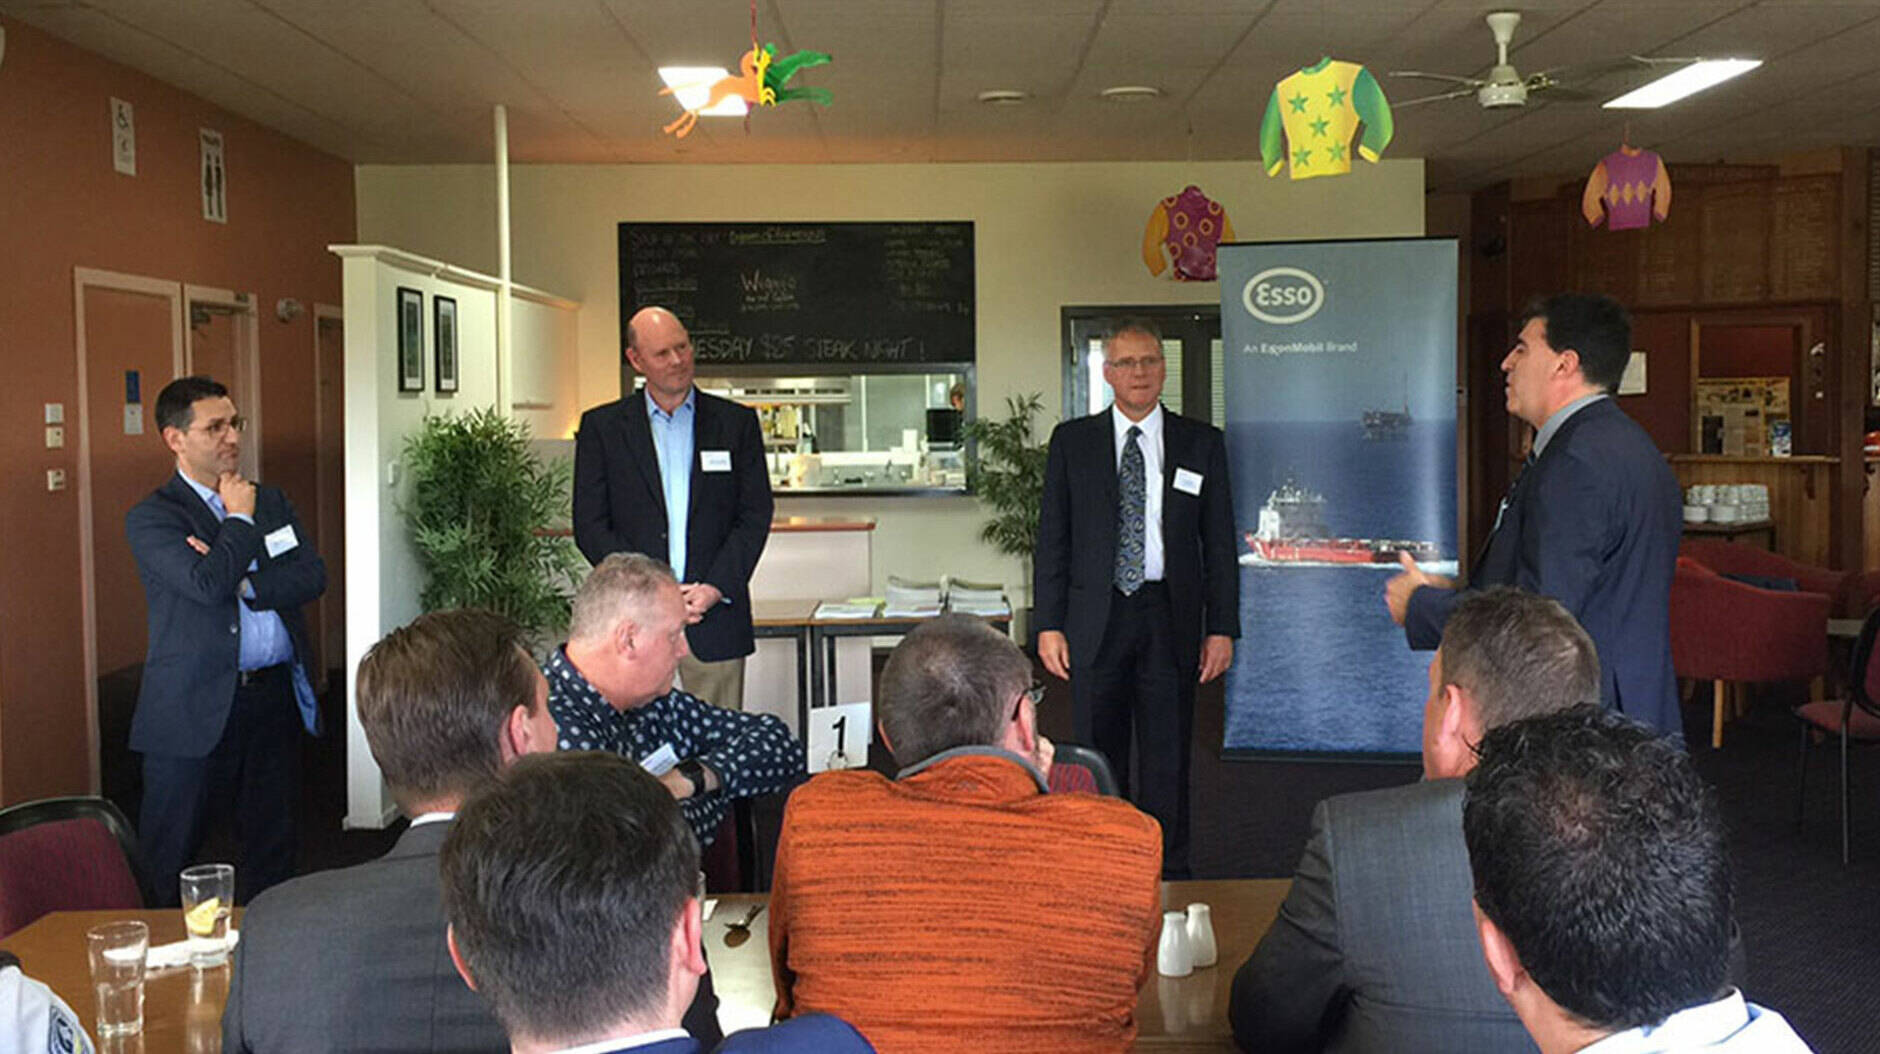 Image Photo Michael Sousa, Ports Director, Qube (pictured left), Mark Duthie, Barry Beach Marine Terminal Superintendent, Esso Australia (pictured centre) and Geoff Humphreys, Offshore Operations Manager, Esso Australia (pictured right) answer questions at the 2017 Barry Beach Marine Terminal Community Lunch at Foster.